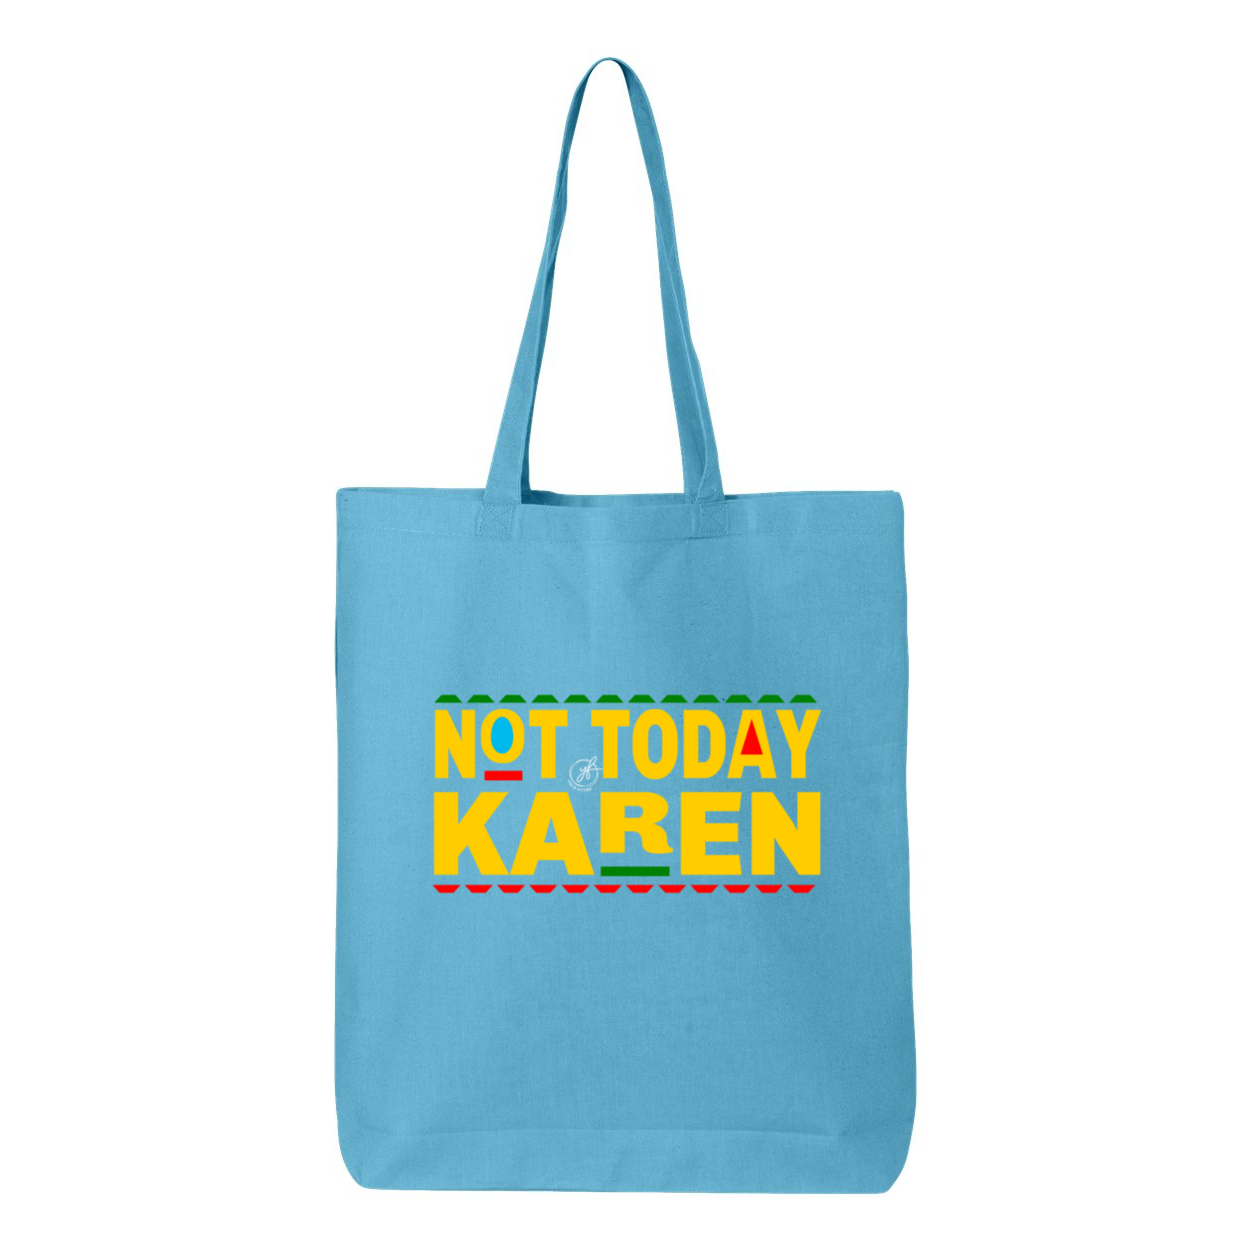 "NOT TODAY KAREN" YOLO FITTED TOTE BAG - Yolofitted